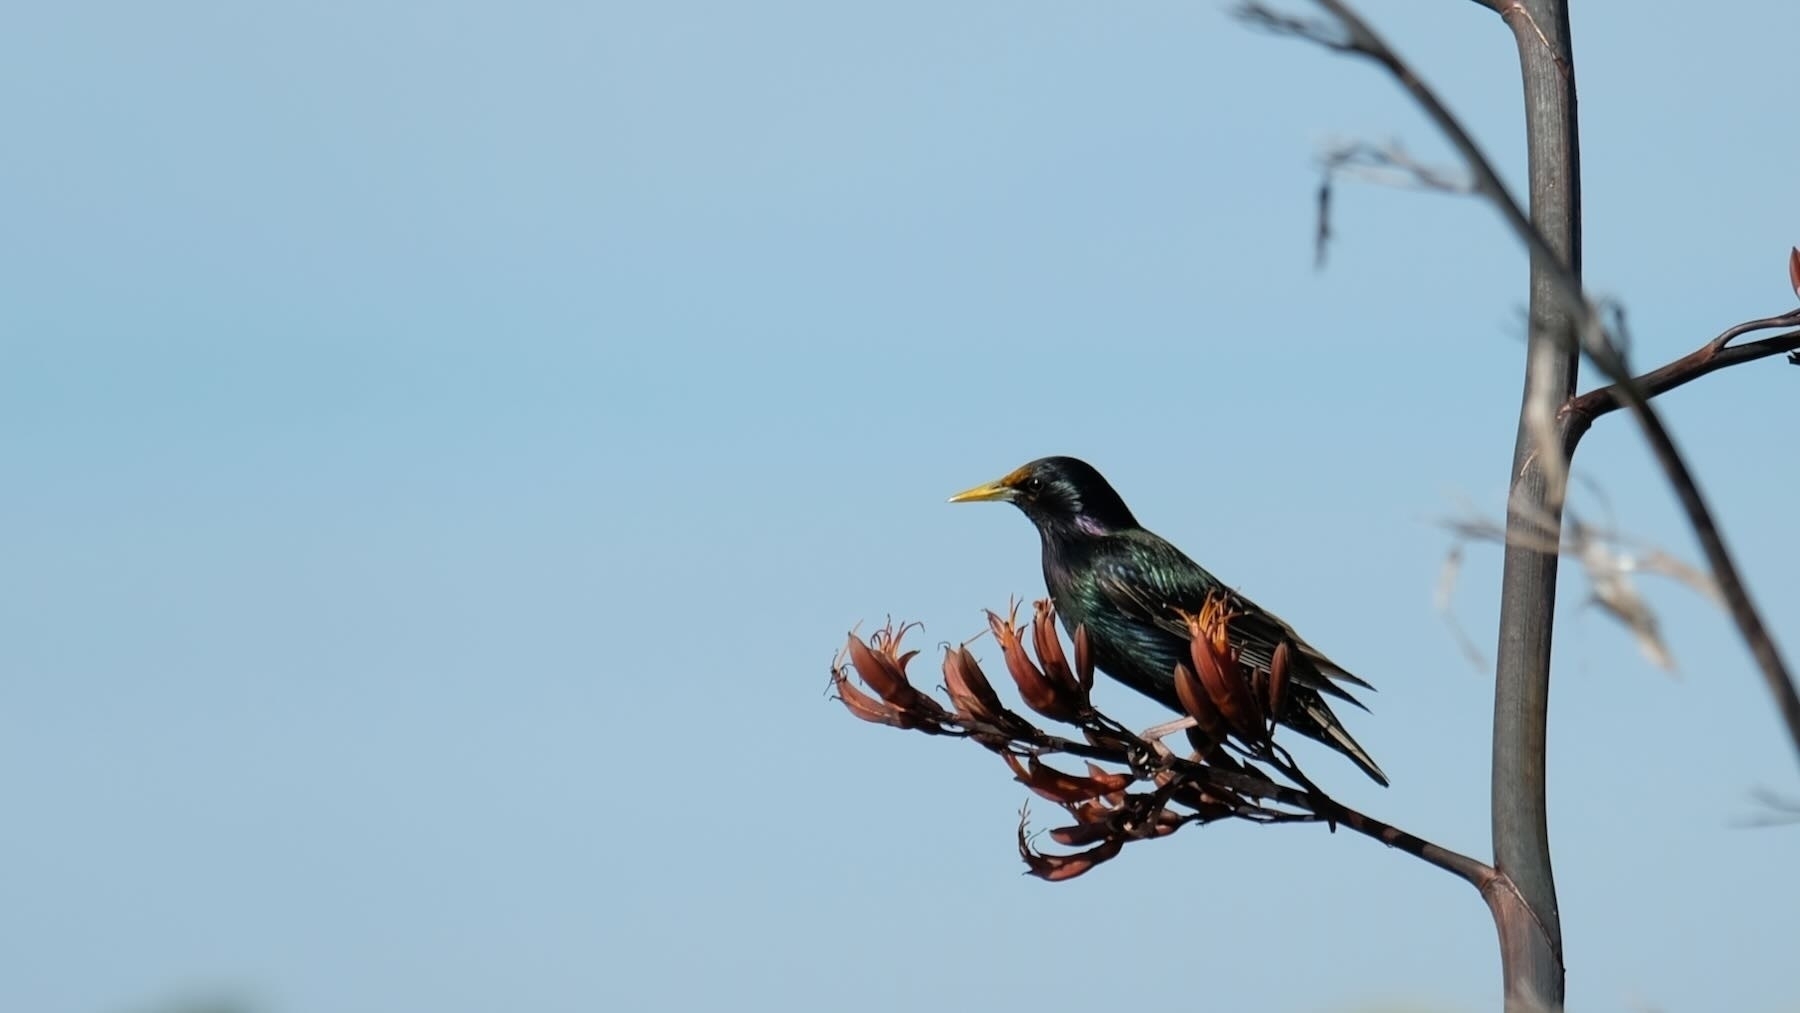 Starling on flax spear. 